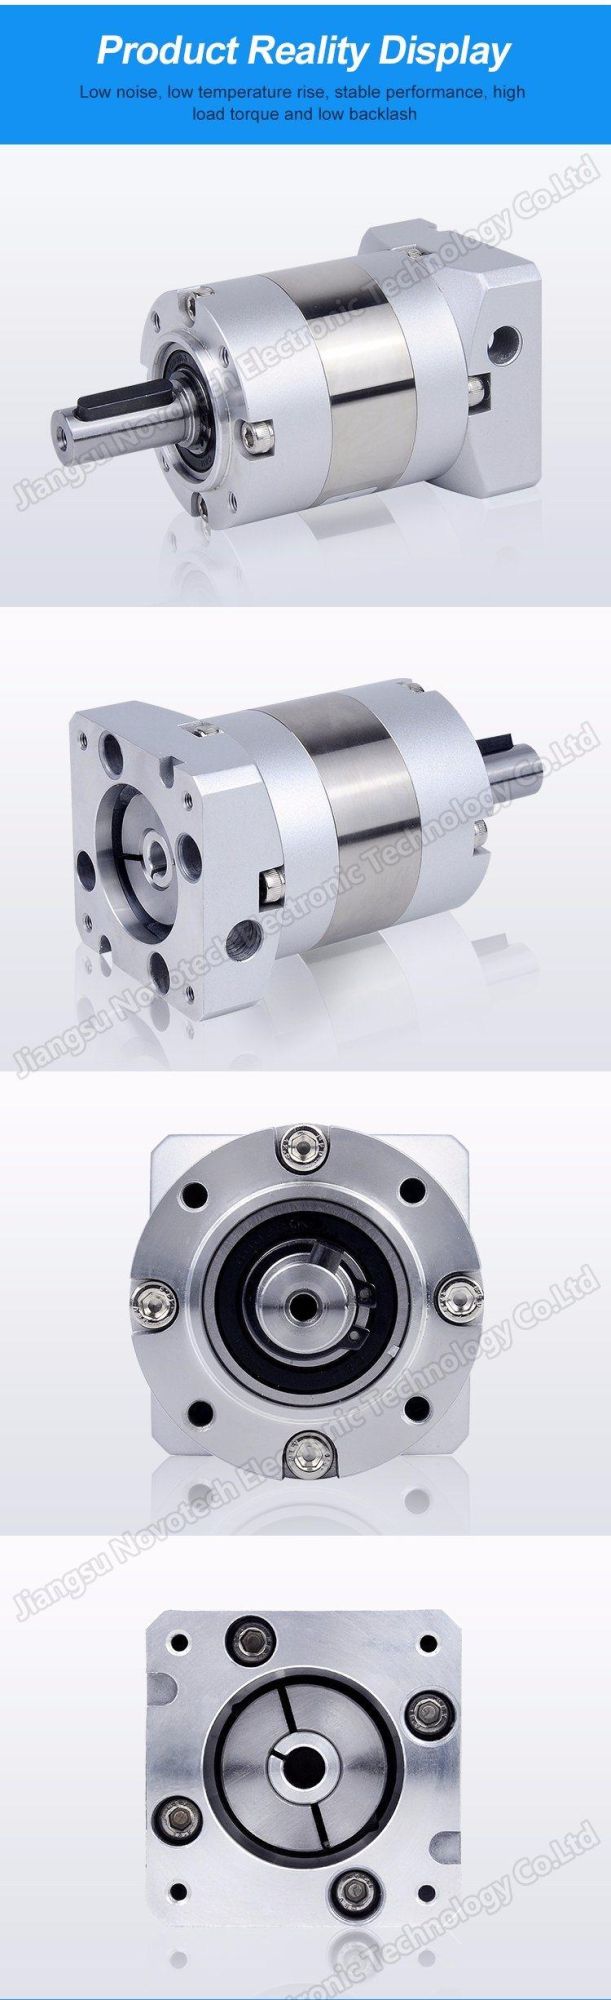 60mm*60mm Machine Gearbox/Gear Box for Motor